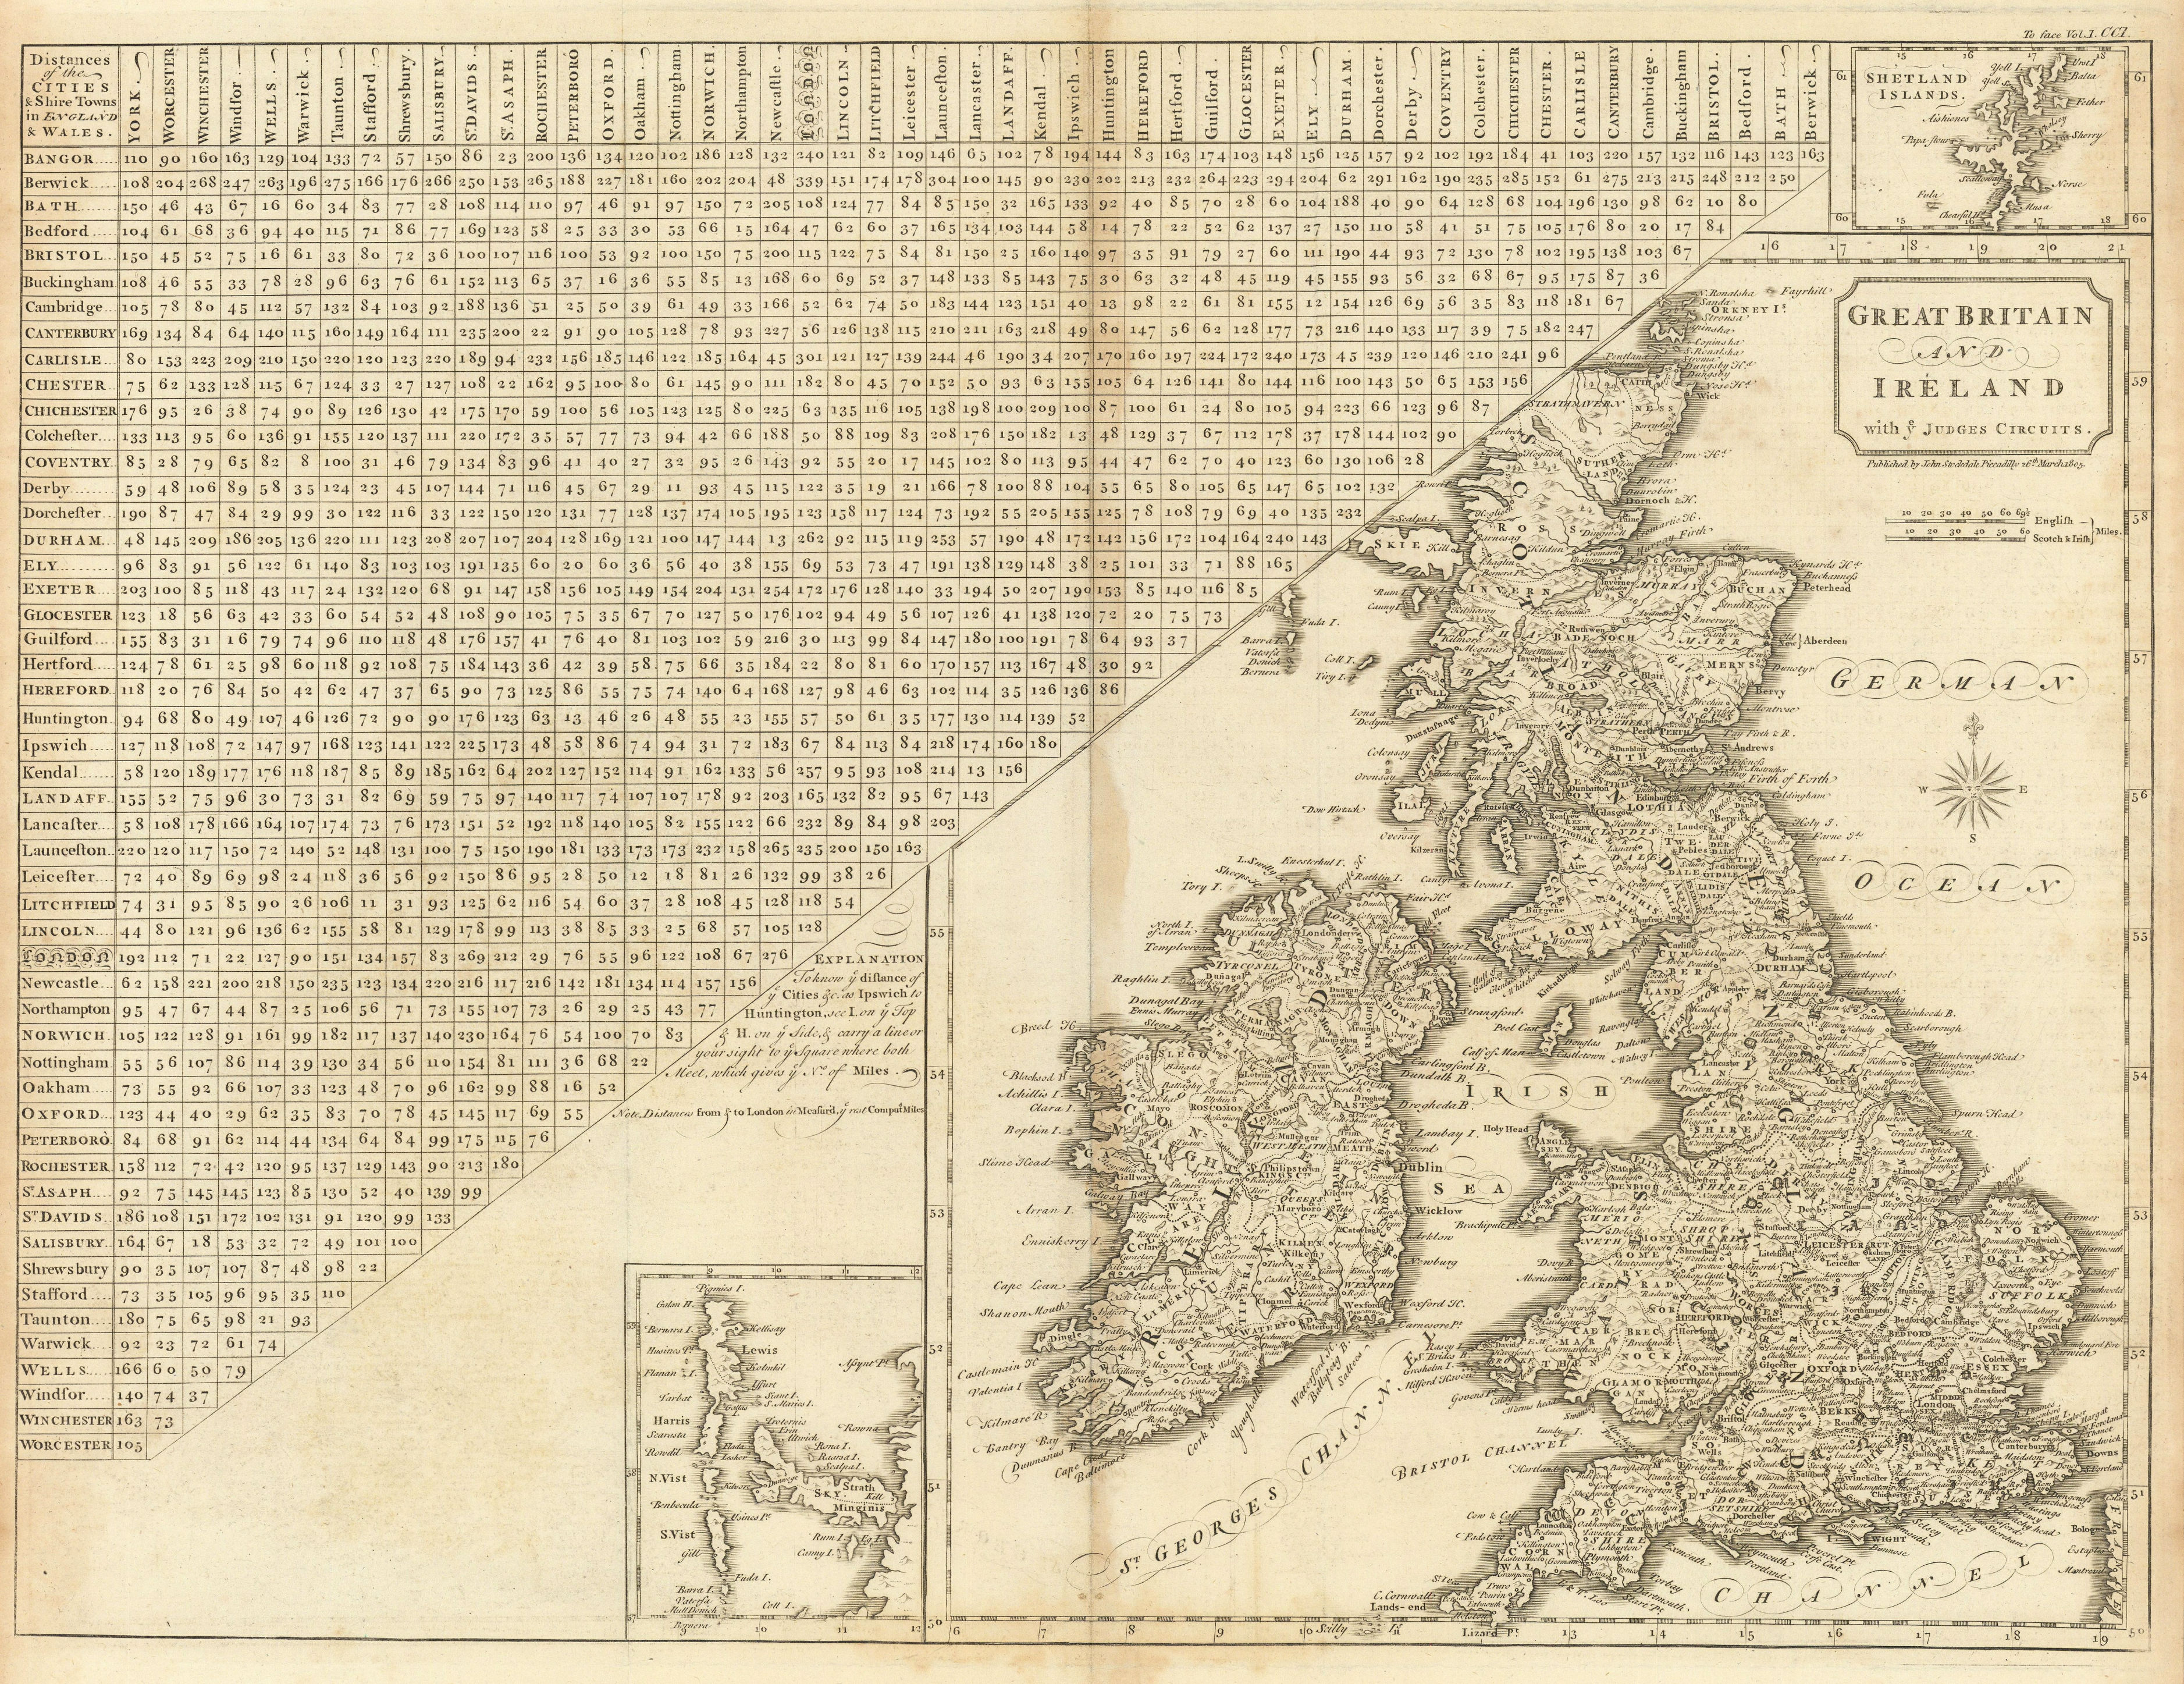 Associate Product "Great Britain and Ireland with ye Judges circuits" by John CARY 1806 old map